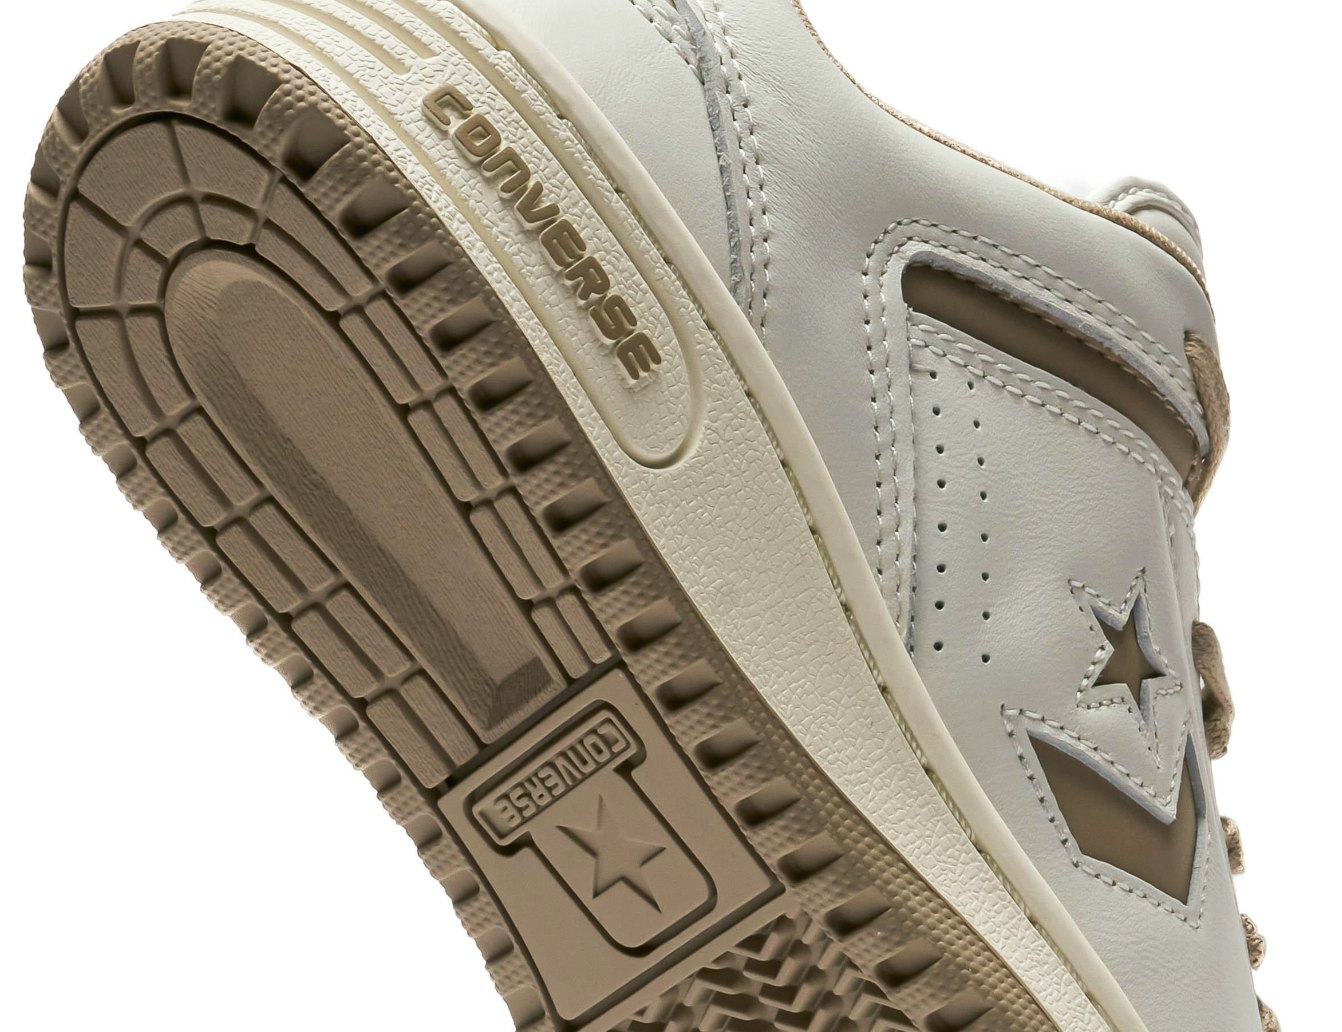 Old Money x Converse Weapon OX Low "Vintage Cargo"